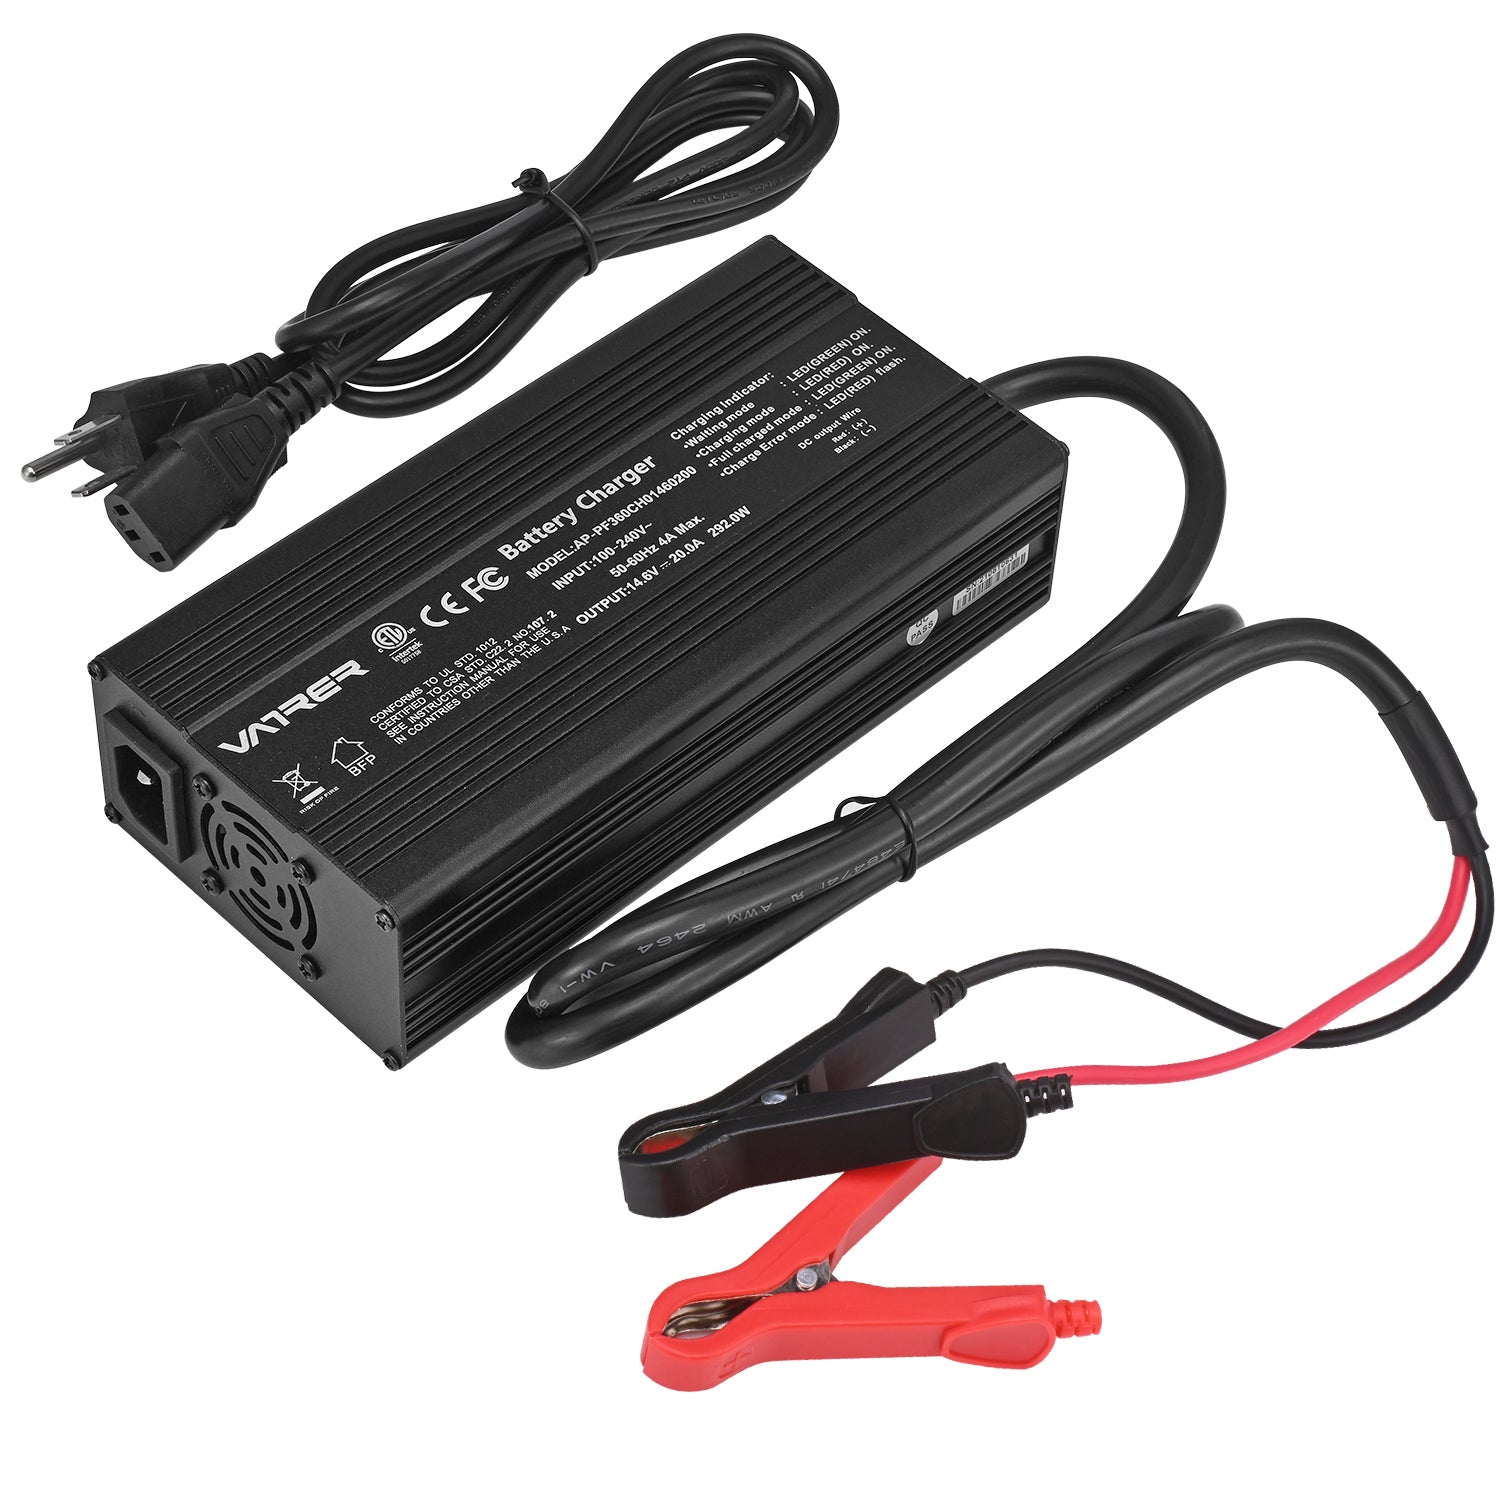 14.6V 20A Intelligent AC-DC Battery Charger, LiFePO4 Battery